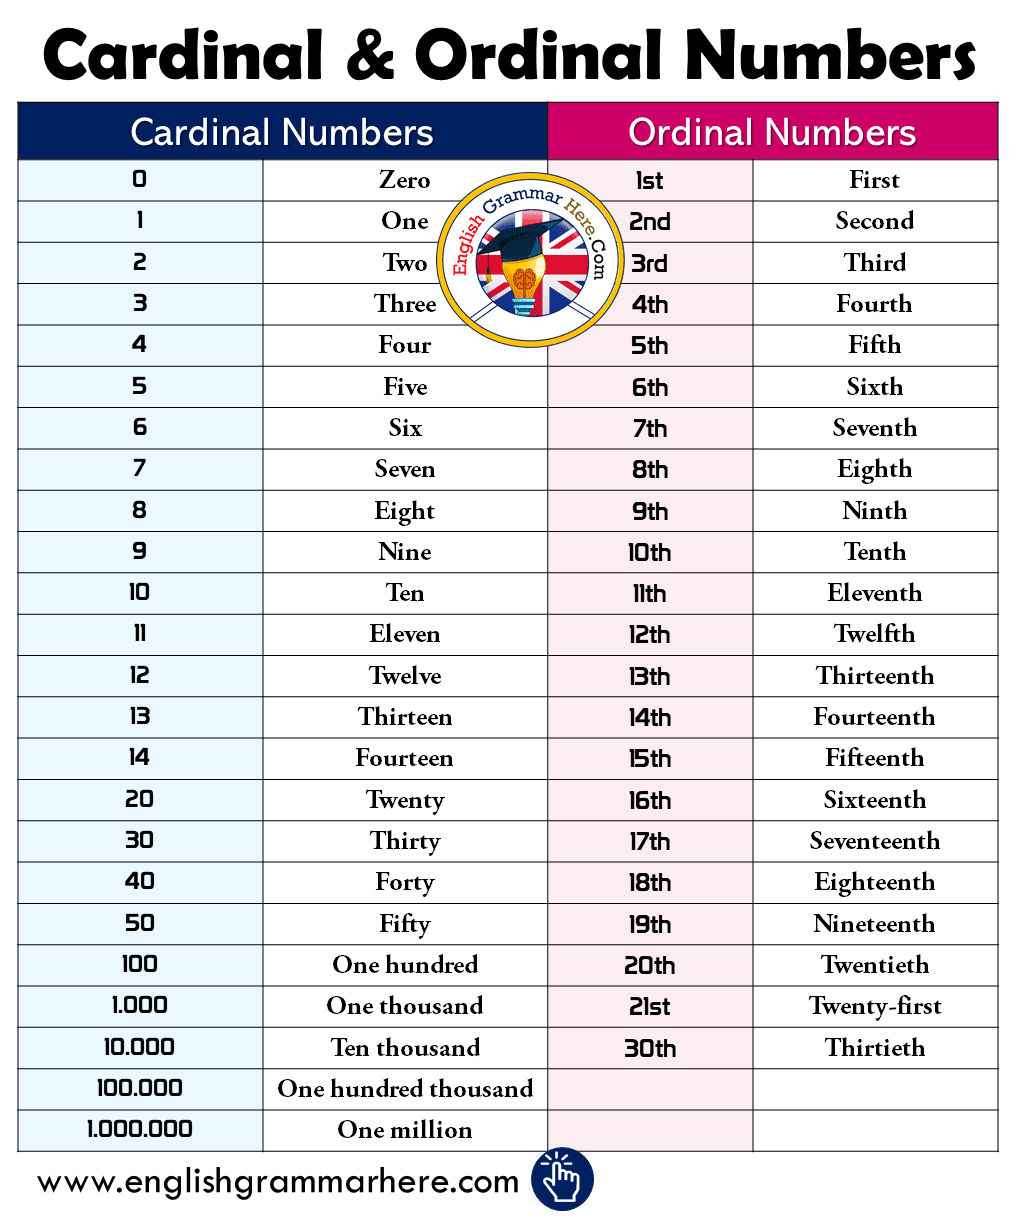 Cardinal Numbers And Ordinal Numbers Meaning